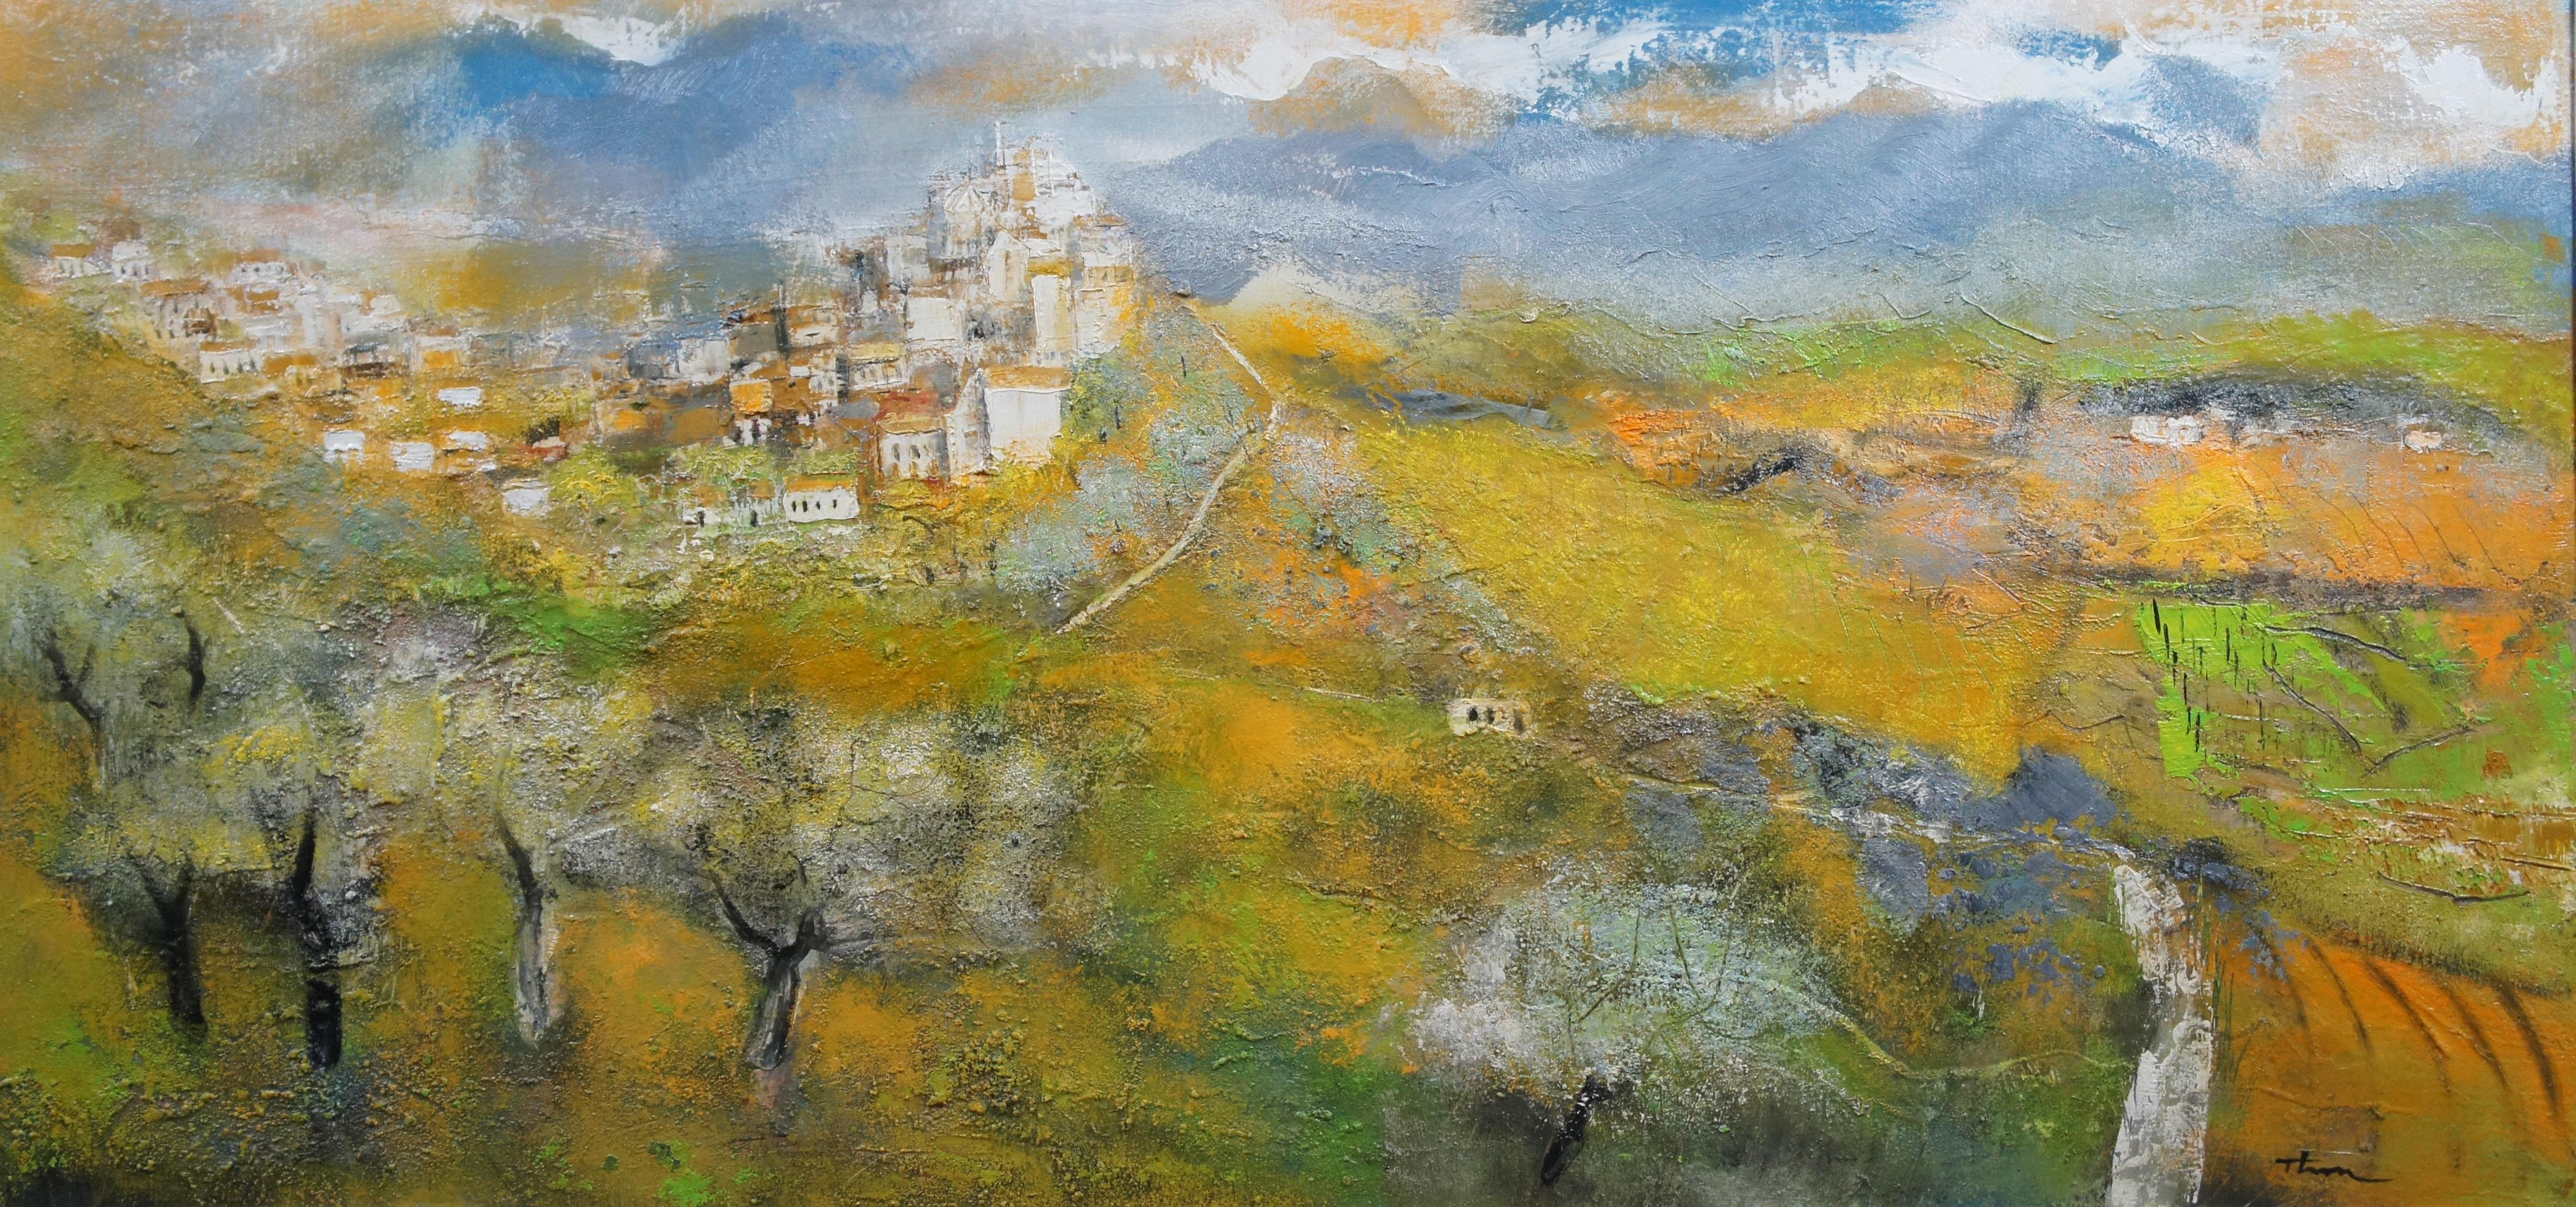 William Thon Mountain Town Calabria Italy Expressionist Oil Landscape Painting In Good Condition For Sale In Dayton, OH